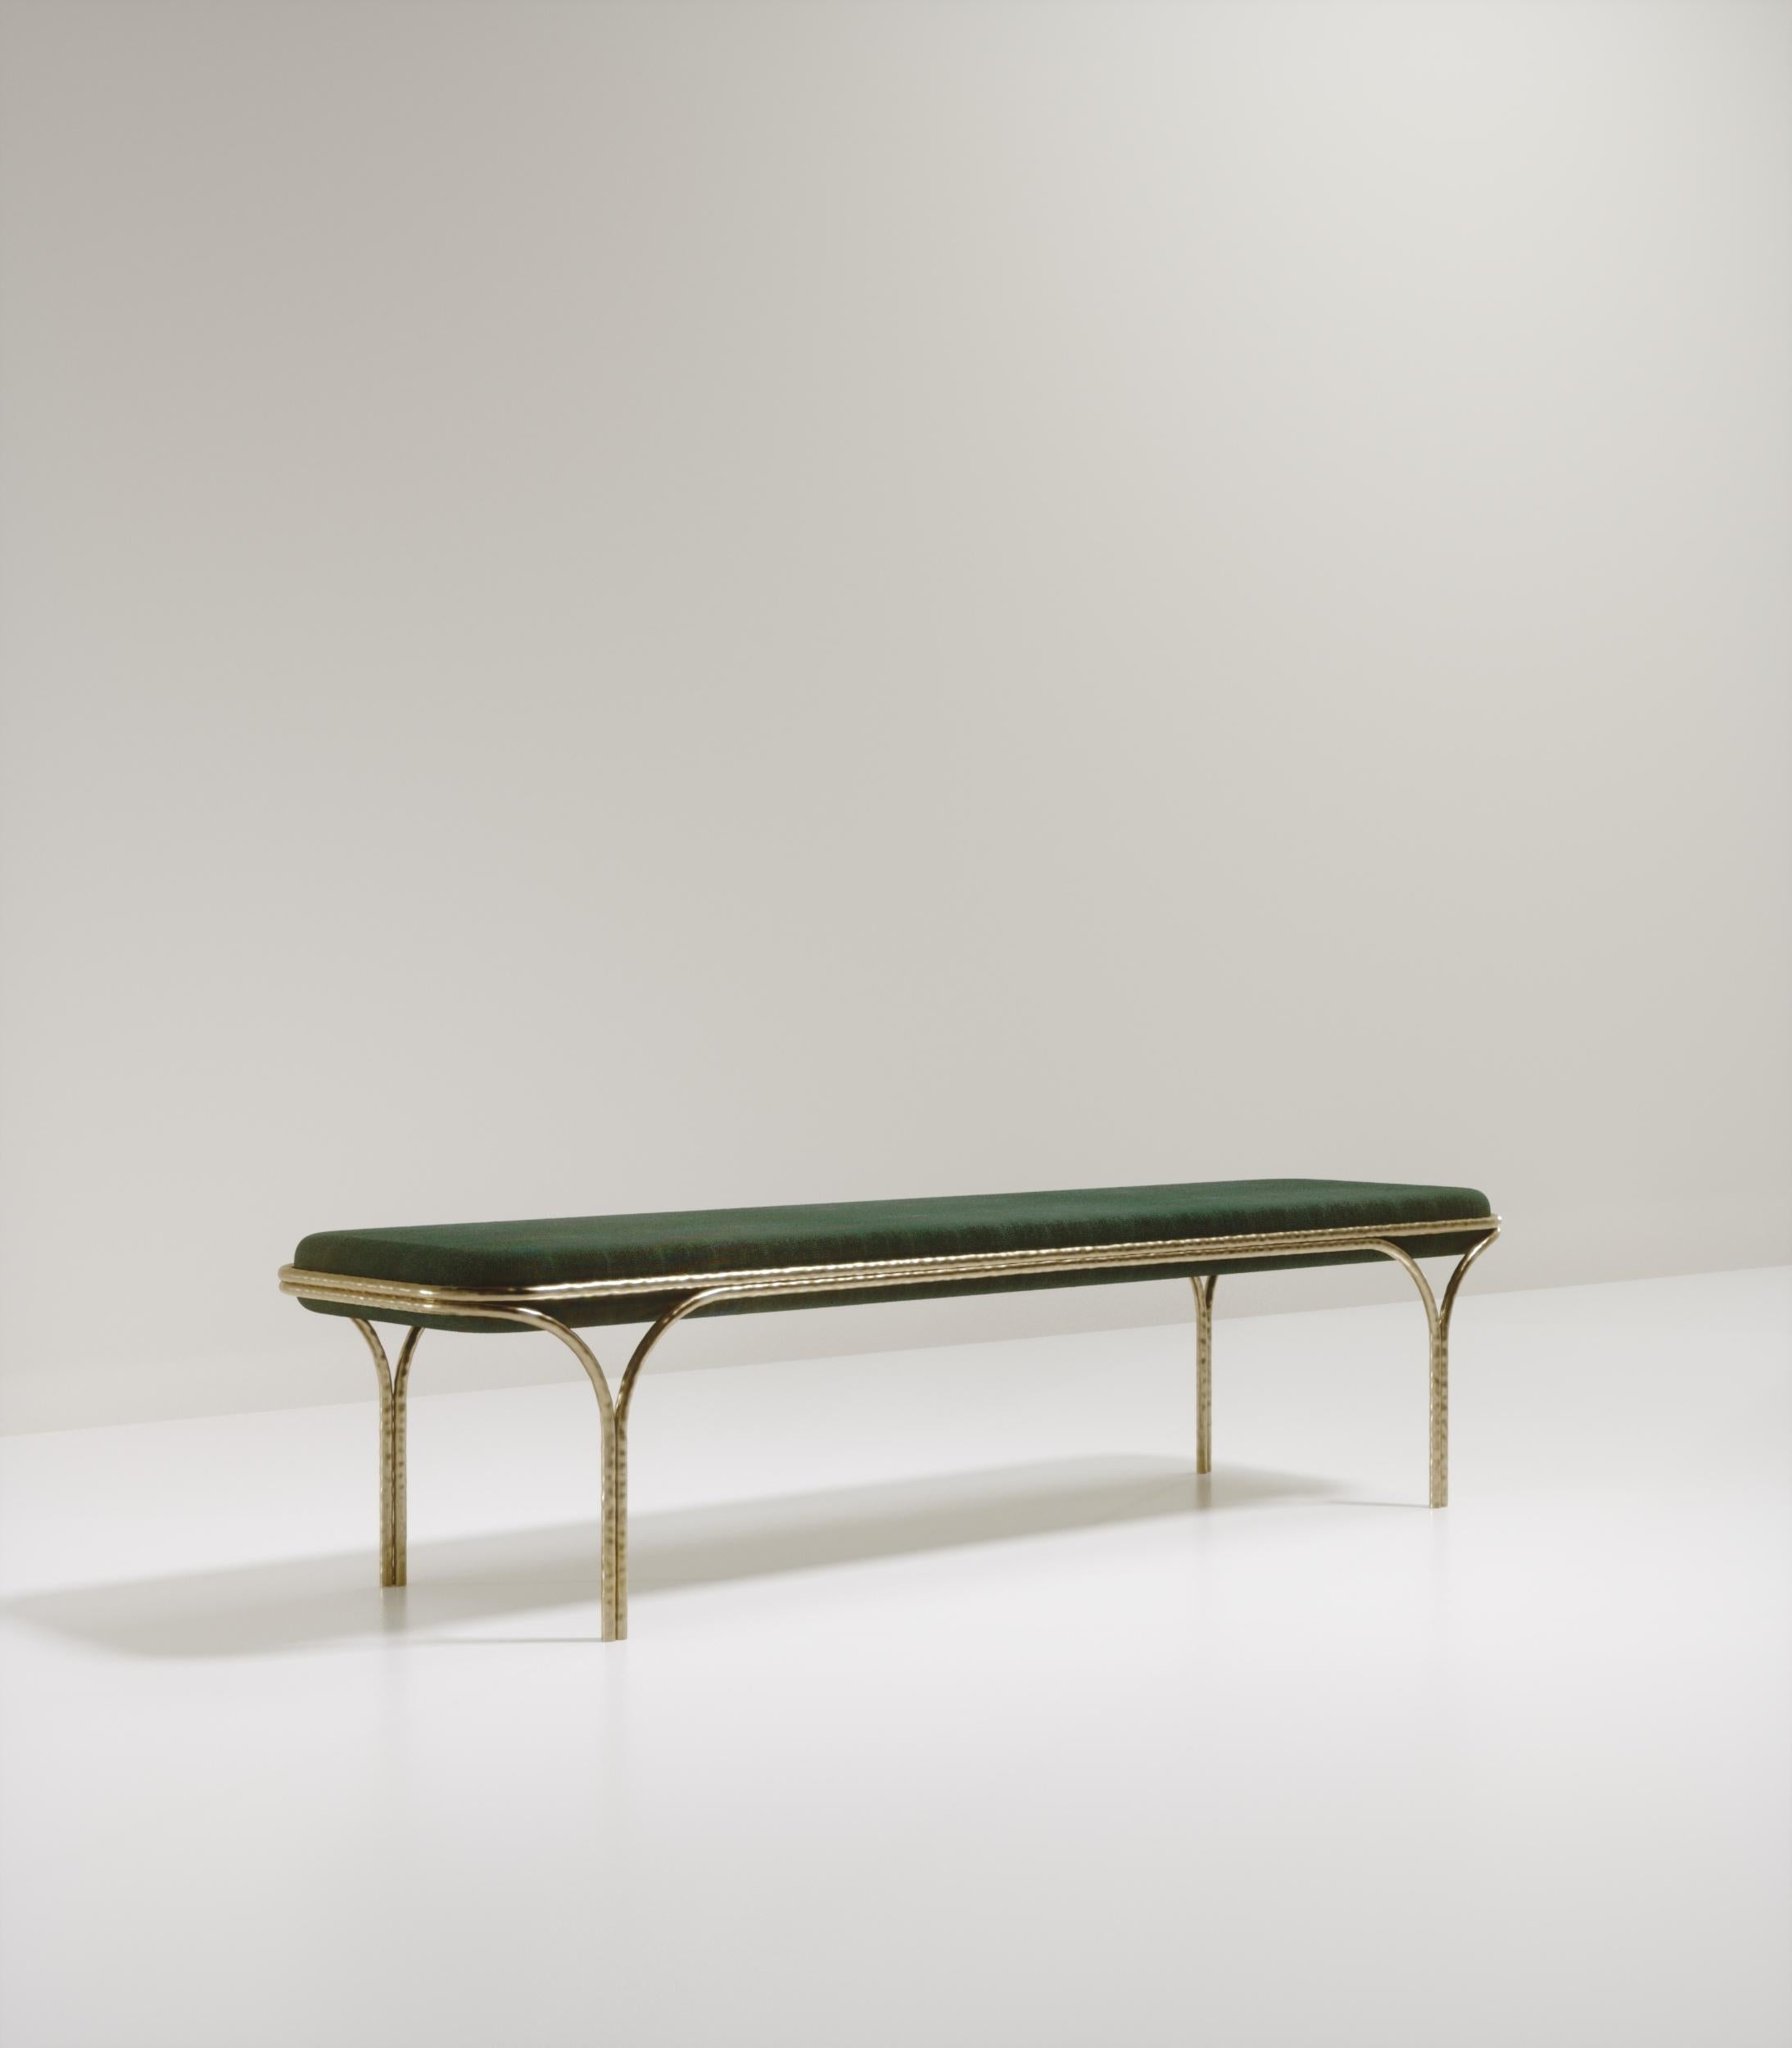 The Arianne bench by R&Y Augousti is an elegant piece for any space. The green shagreen seat, with curved edges, sits on an organic bronze-patina frame. The intricate frame and legs have a 